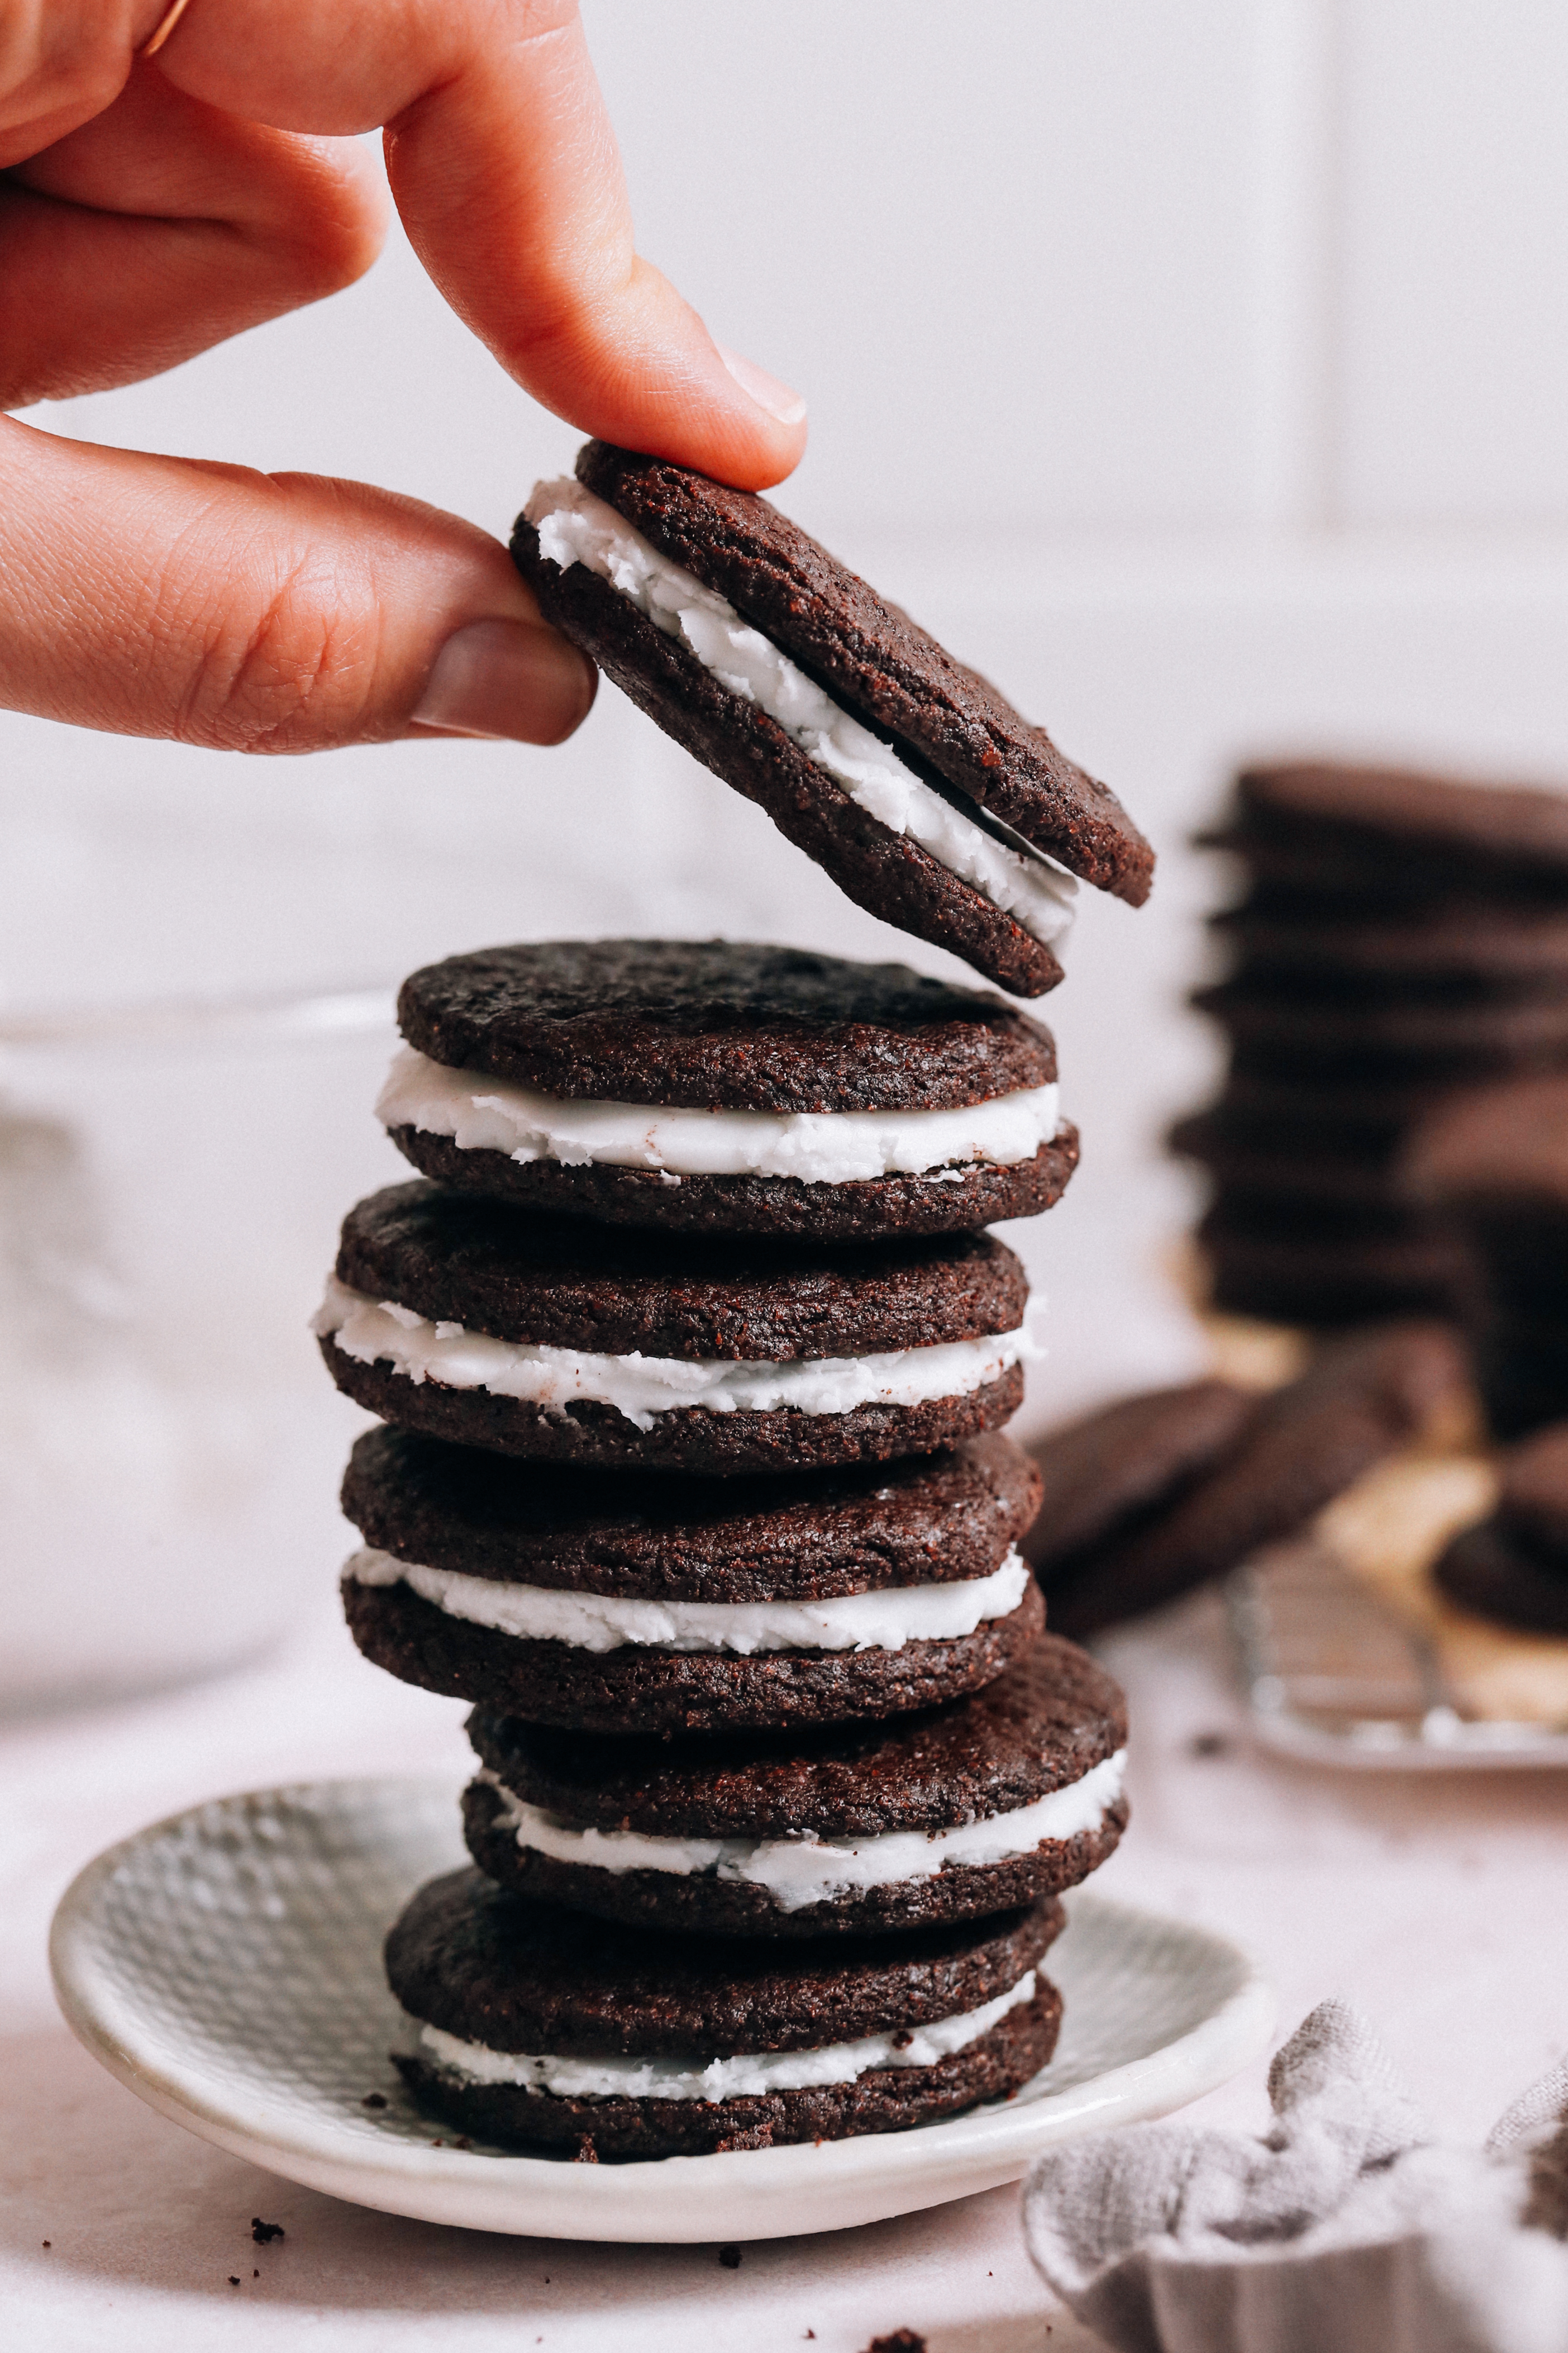 Picking a vegan gluten-free Oreo from a stack of cookies